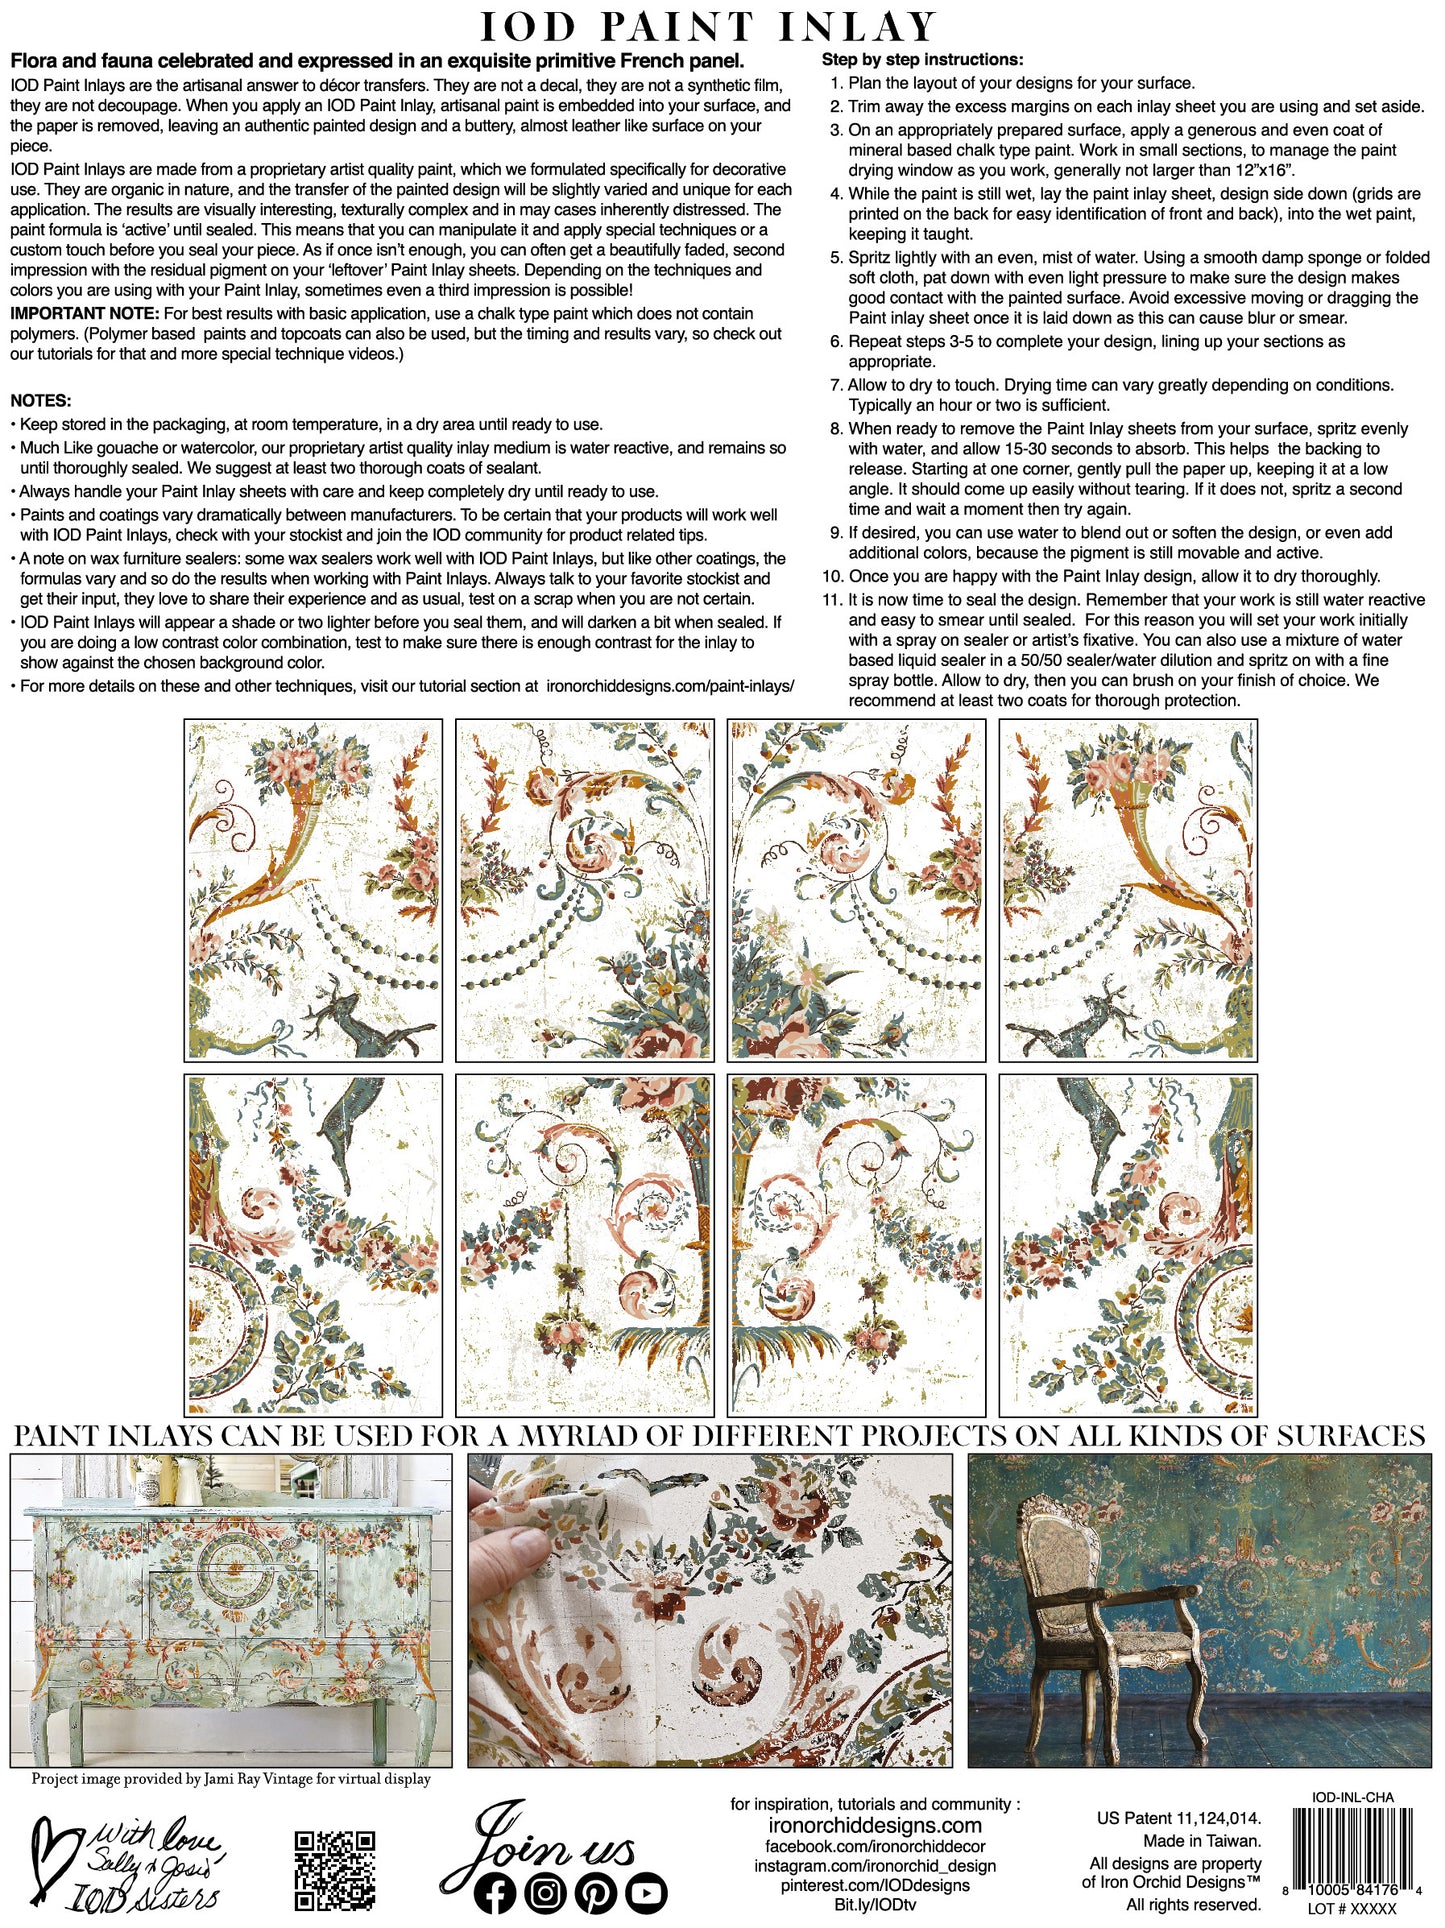 Chateau Paint InLay by IOD